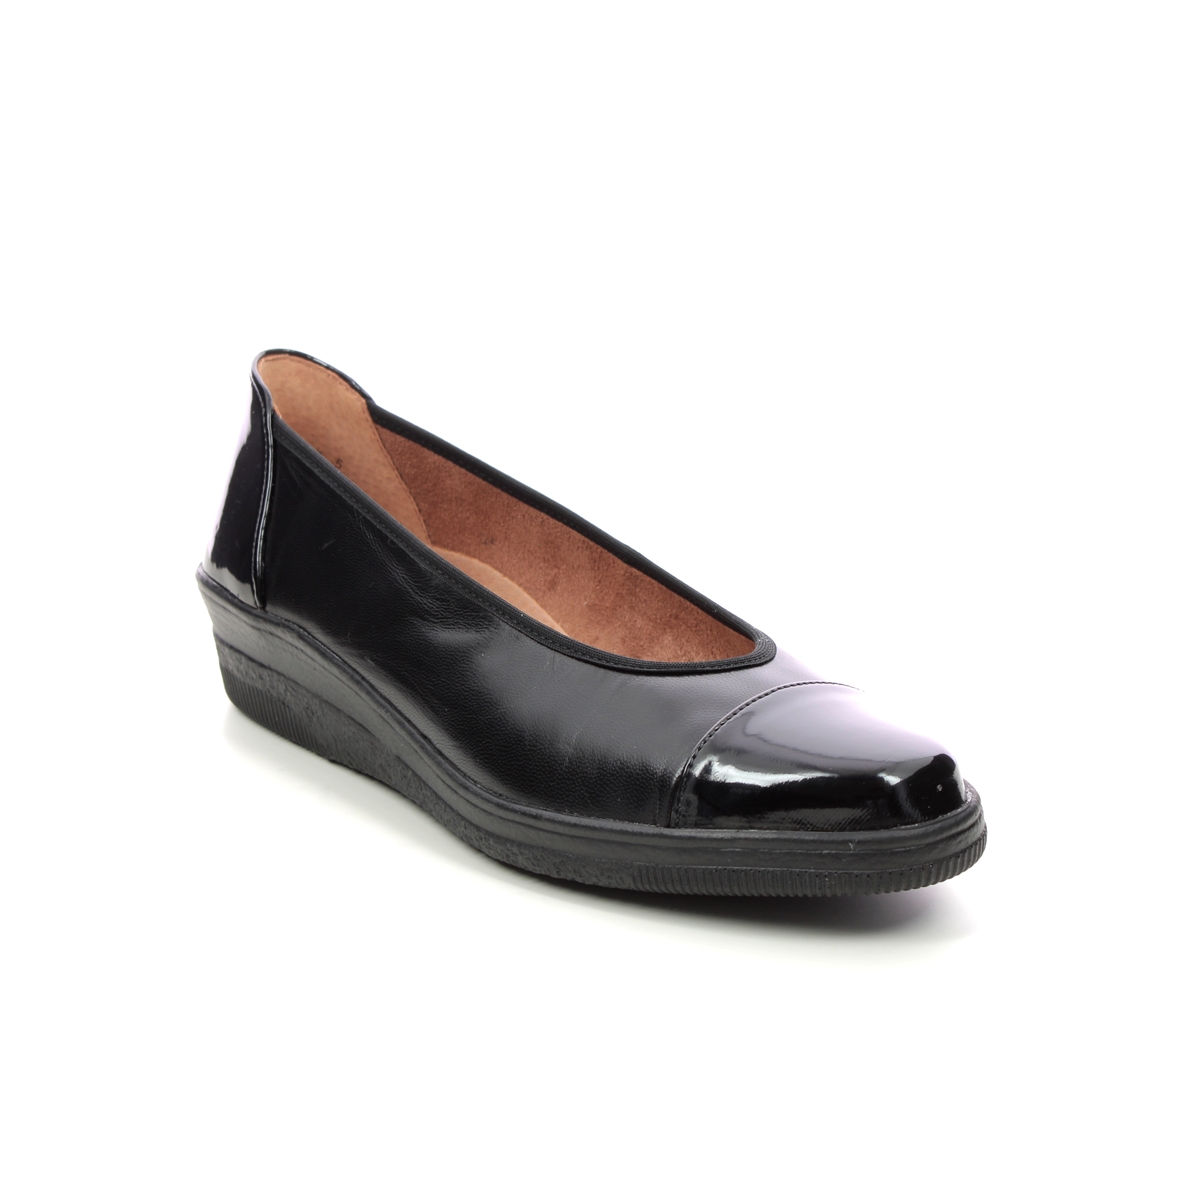 Gabor Petunia Black Patent Leather Womens Comfort Slip On Shoes 06.402.37 In Size 7 In Plain Black Patent Leather  Womens Comfort Slip On Shoes In Sof